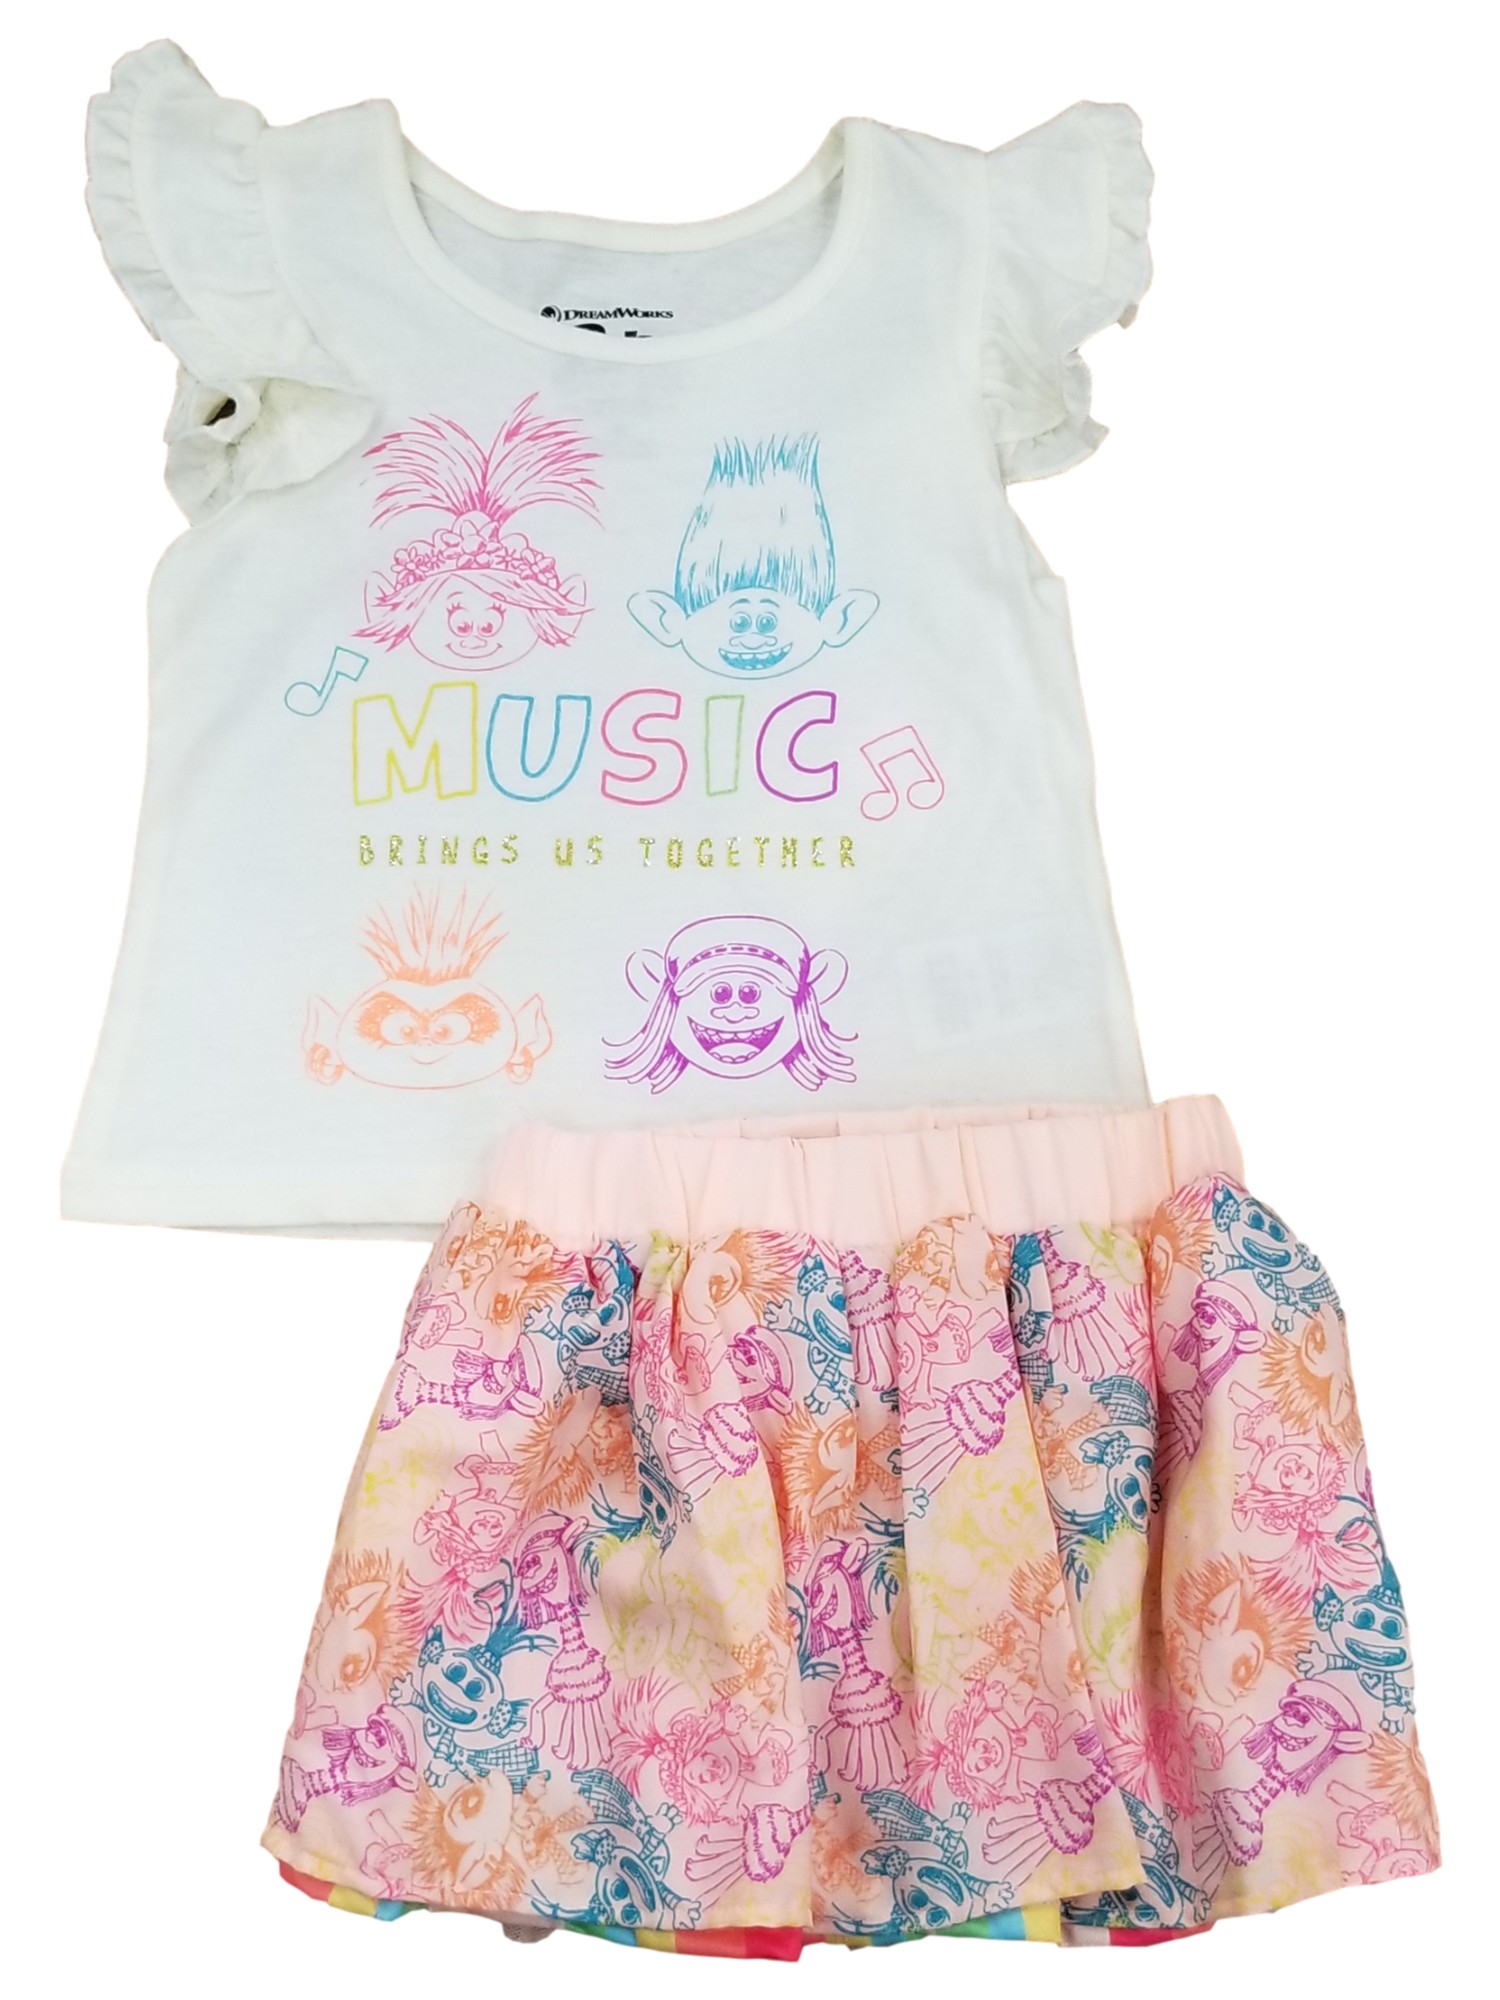 Trolls Toddler Girls Trolls Poppy Music Brings Us Together Shirt & Shorts Outfit